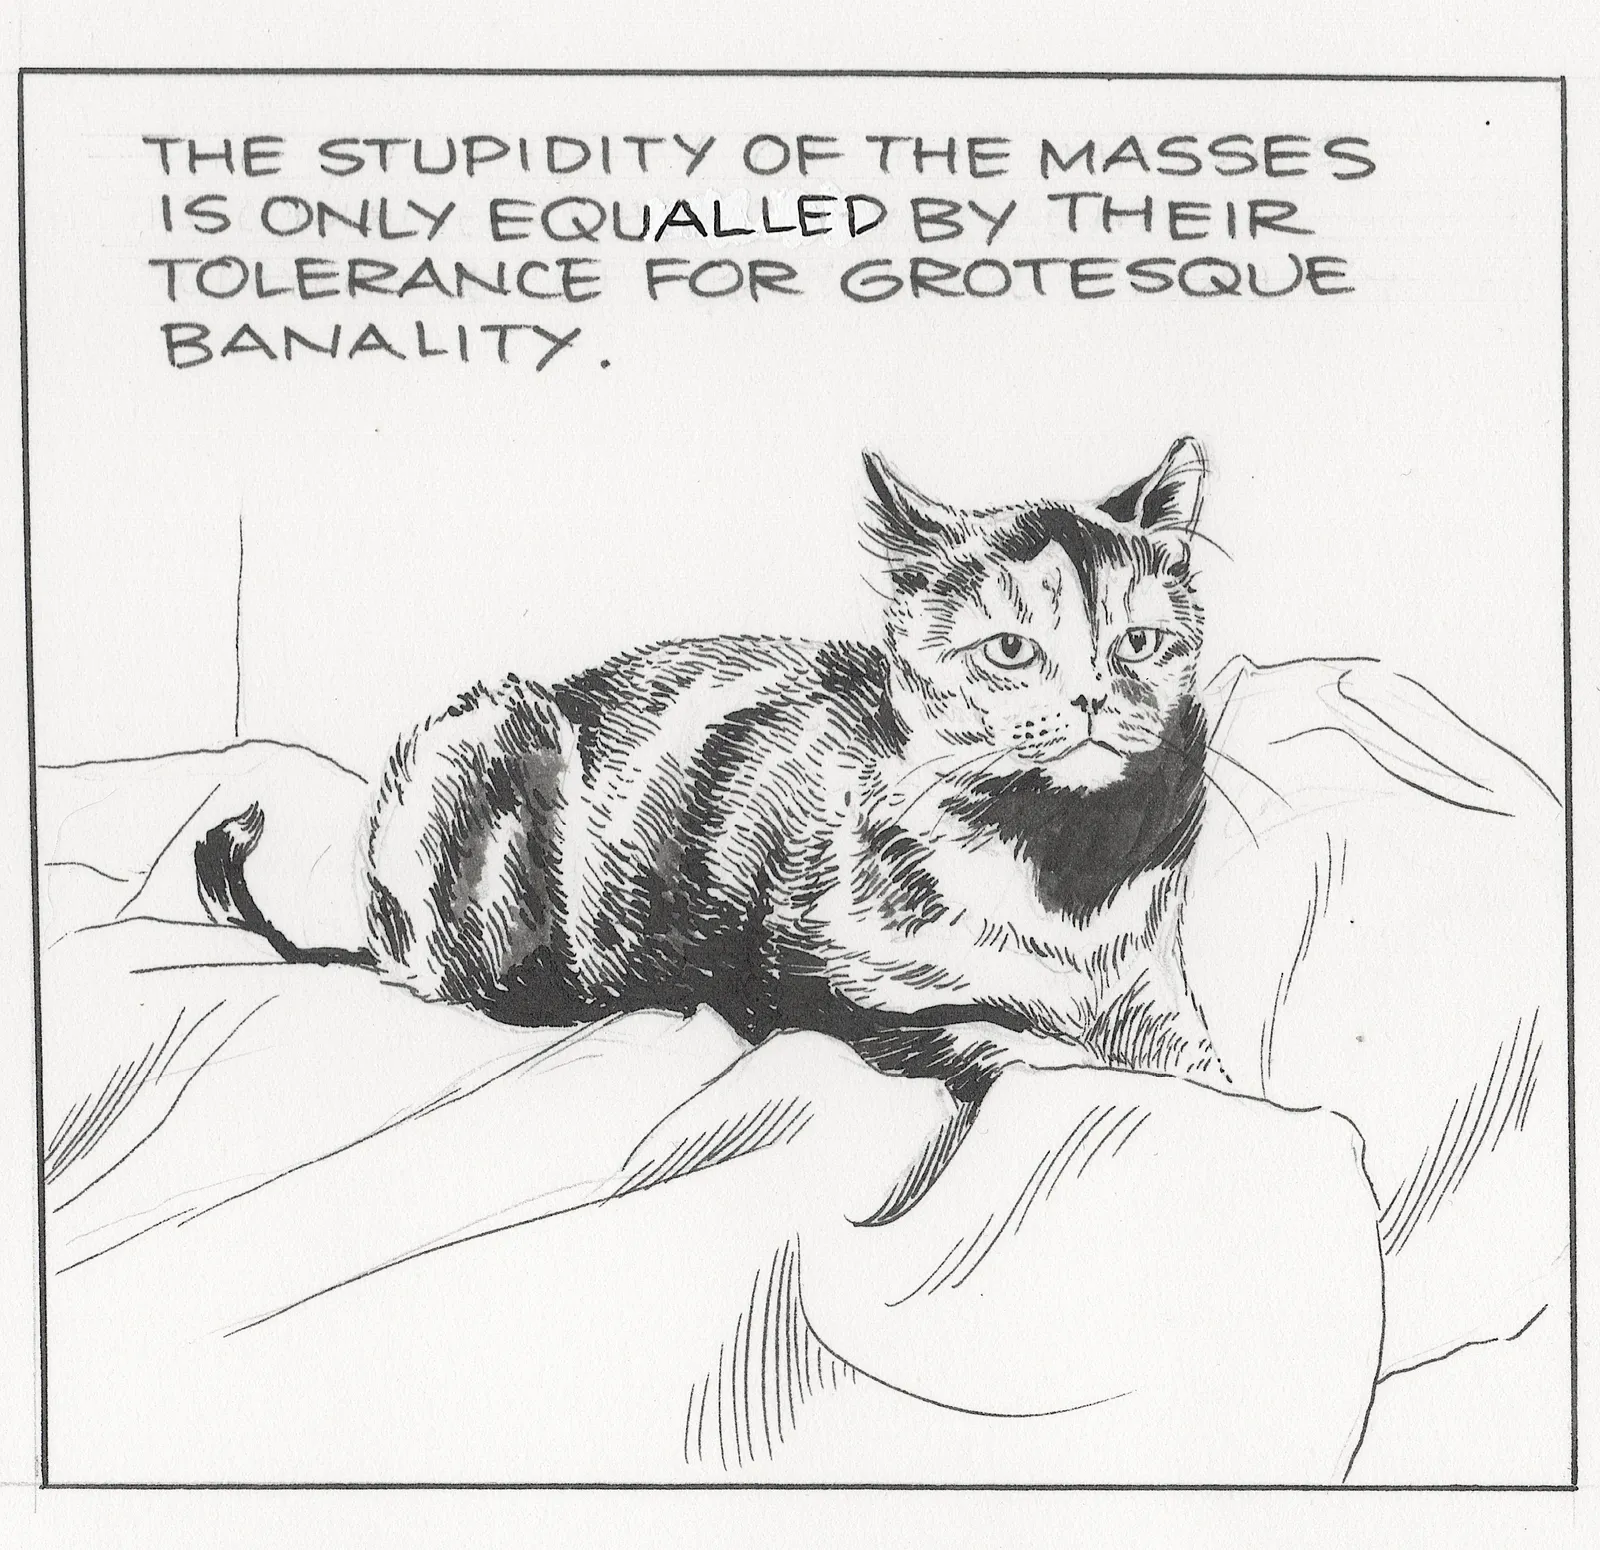 Cat cartoon with words: "The stupidity of the masses is only equalled by their tolerance for grotesque banality"